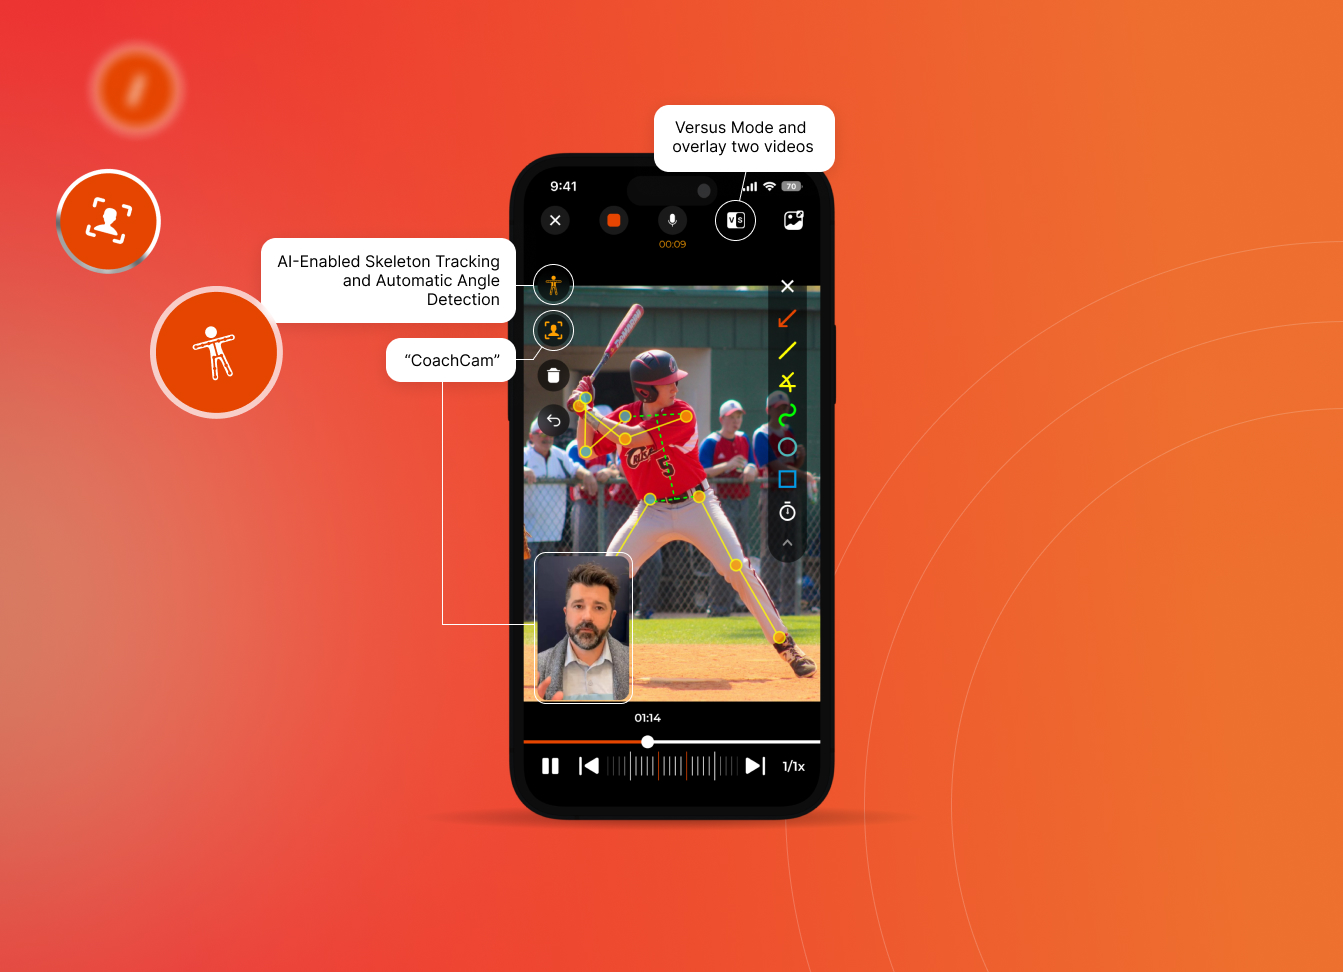 coachnow skeleton tracking and angle detection on a young athlete throwing a baseball